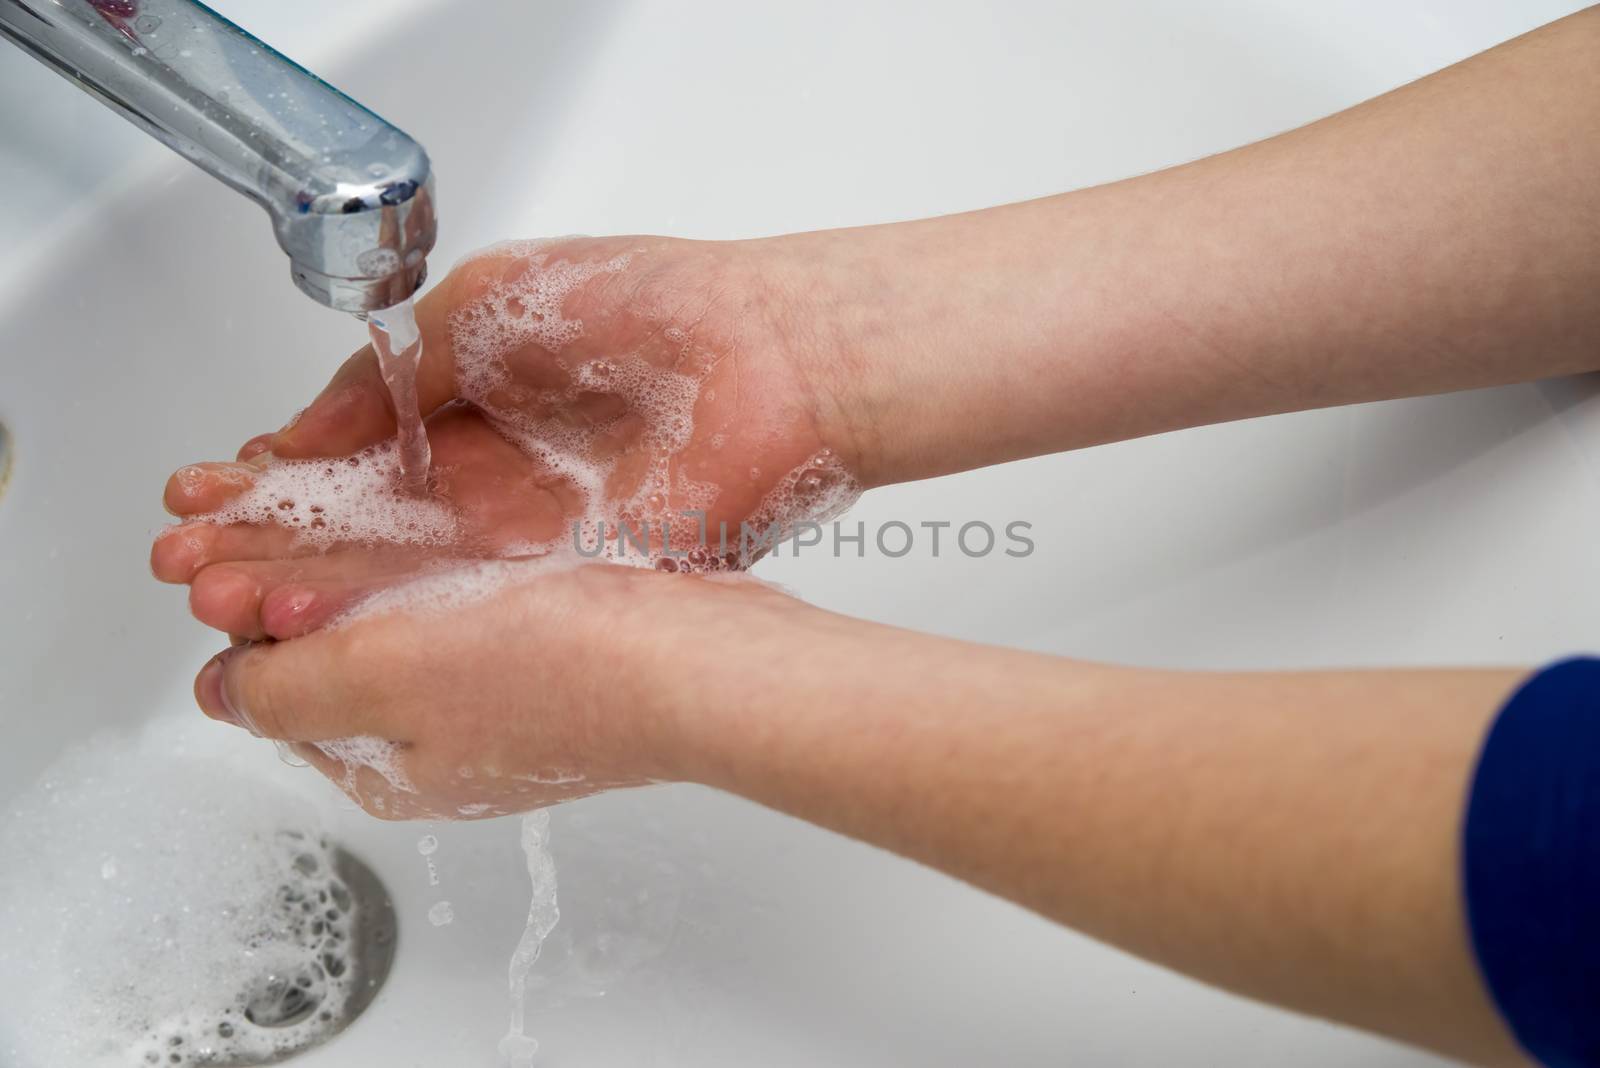 Coronavirus pandemic prevention, hands washing with soap